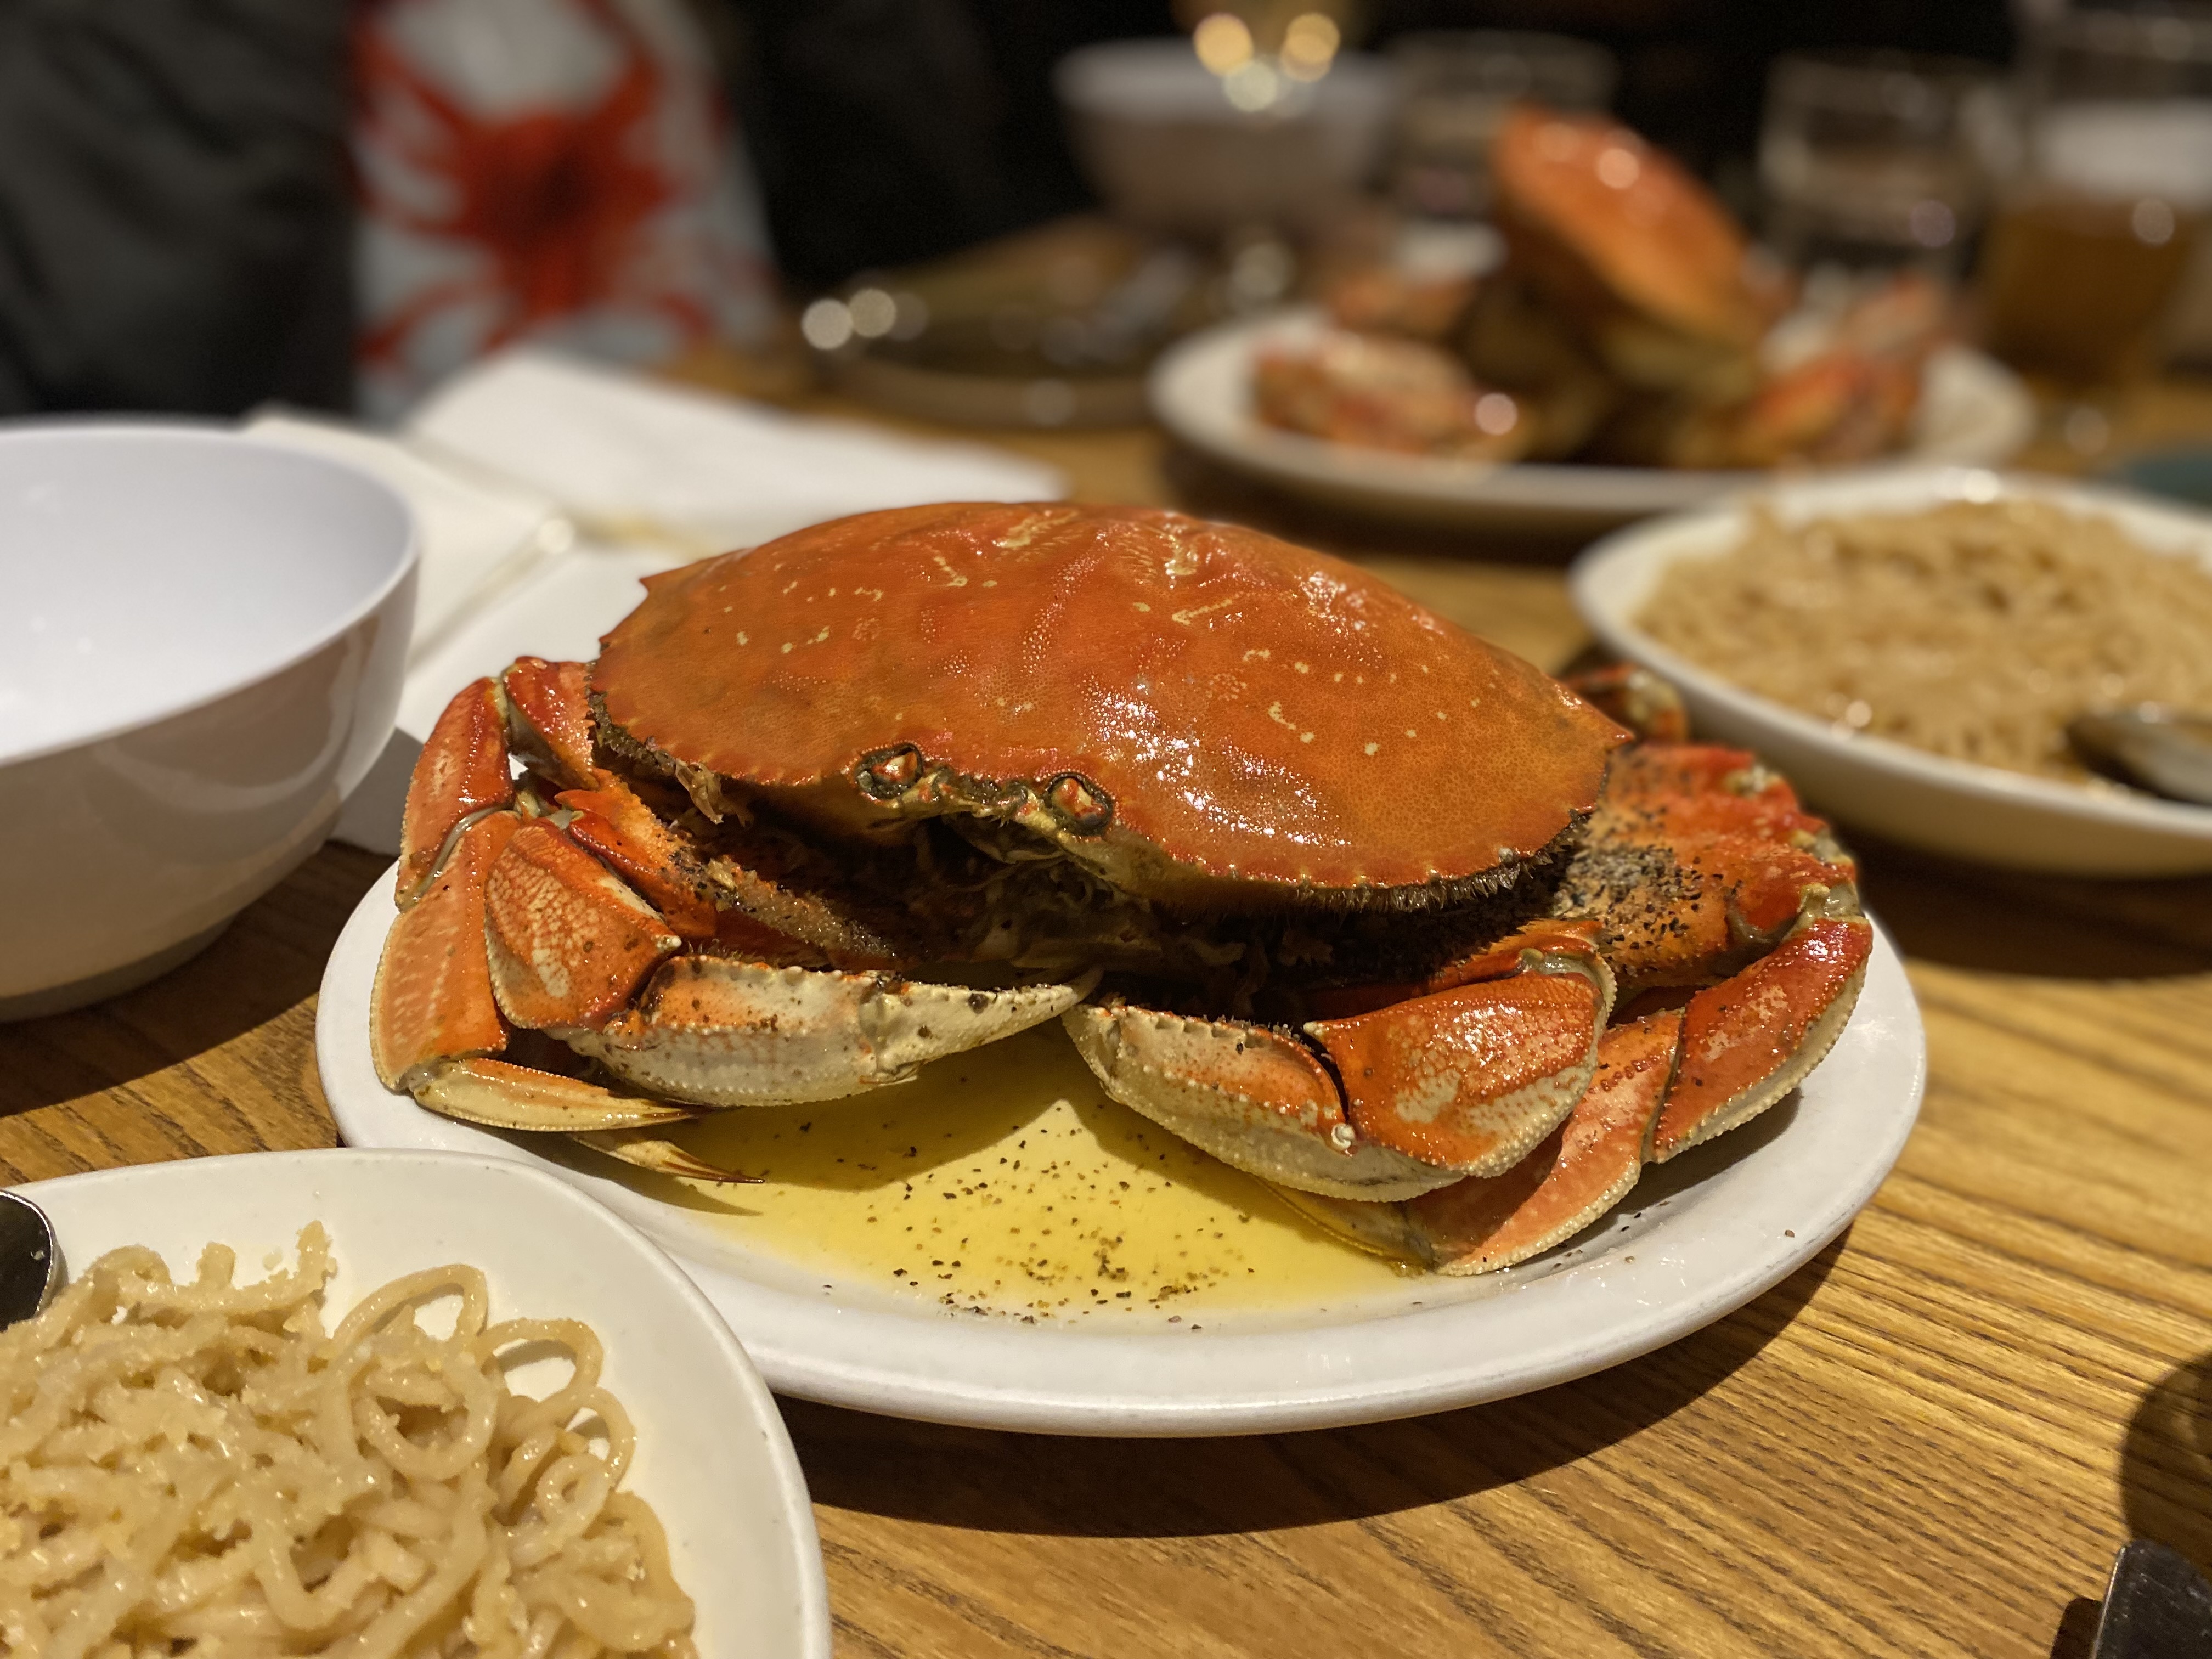 A steamed whole crab on a plate.